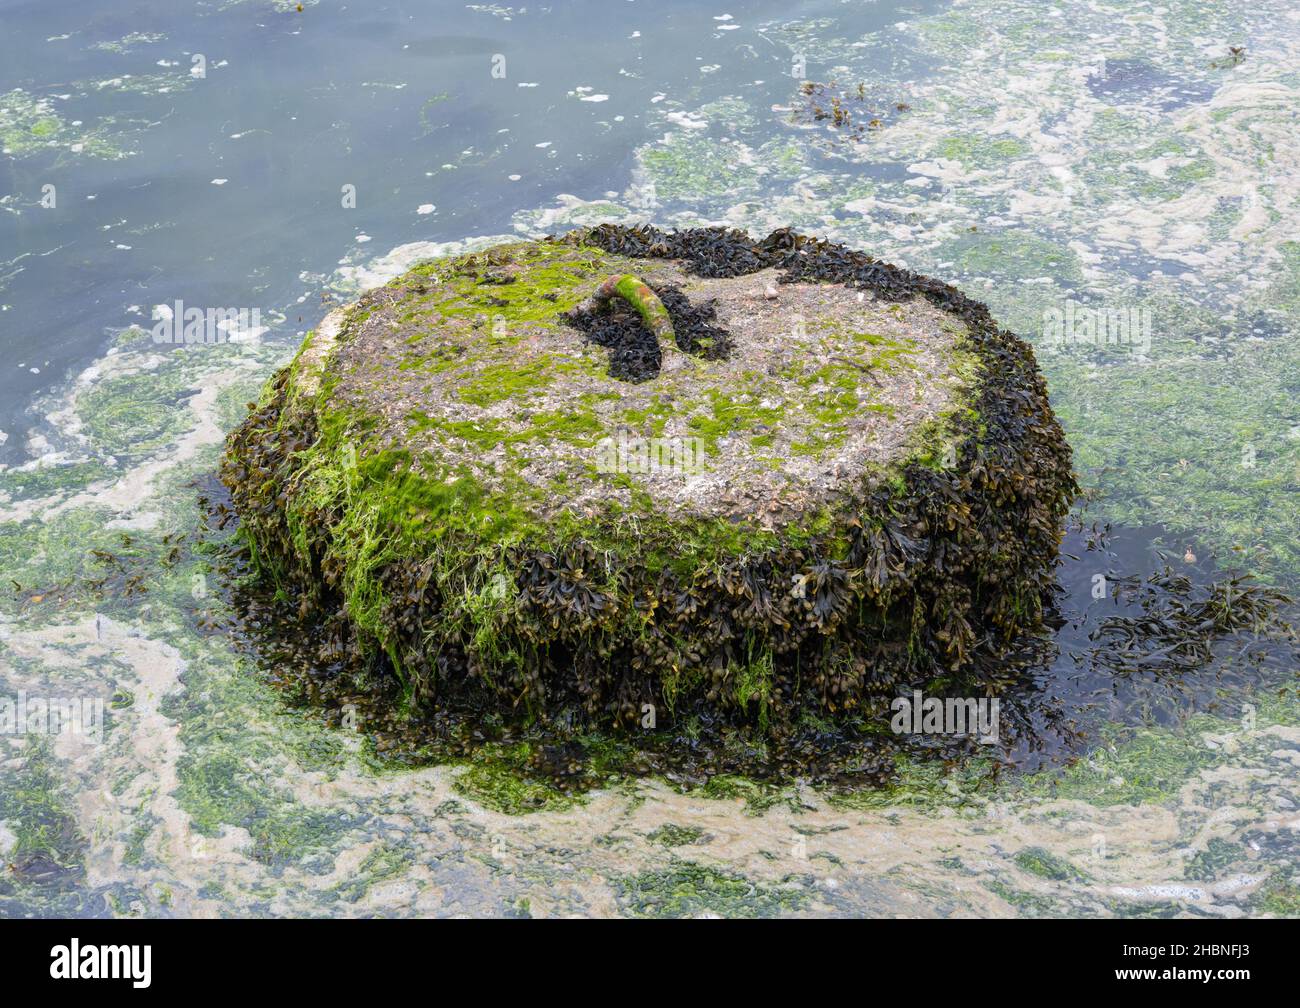 Concrete boat mooring or sinker or buoy attachment concrete block, shown exposed by low tide, covered with debris and seaweed, in the UK. Stock Photo